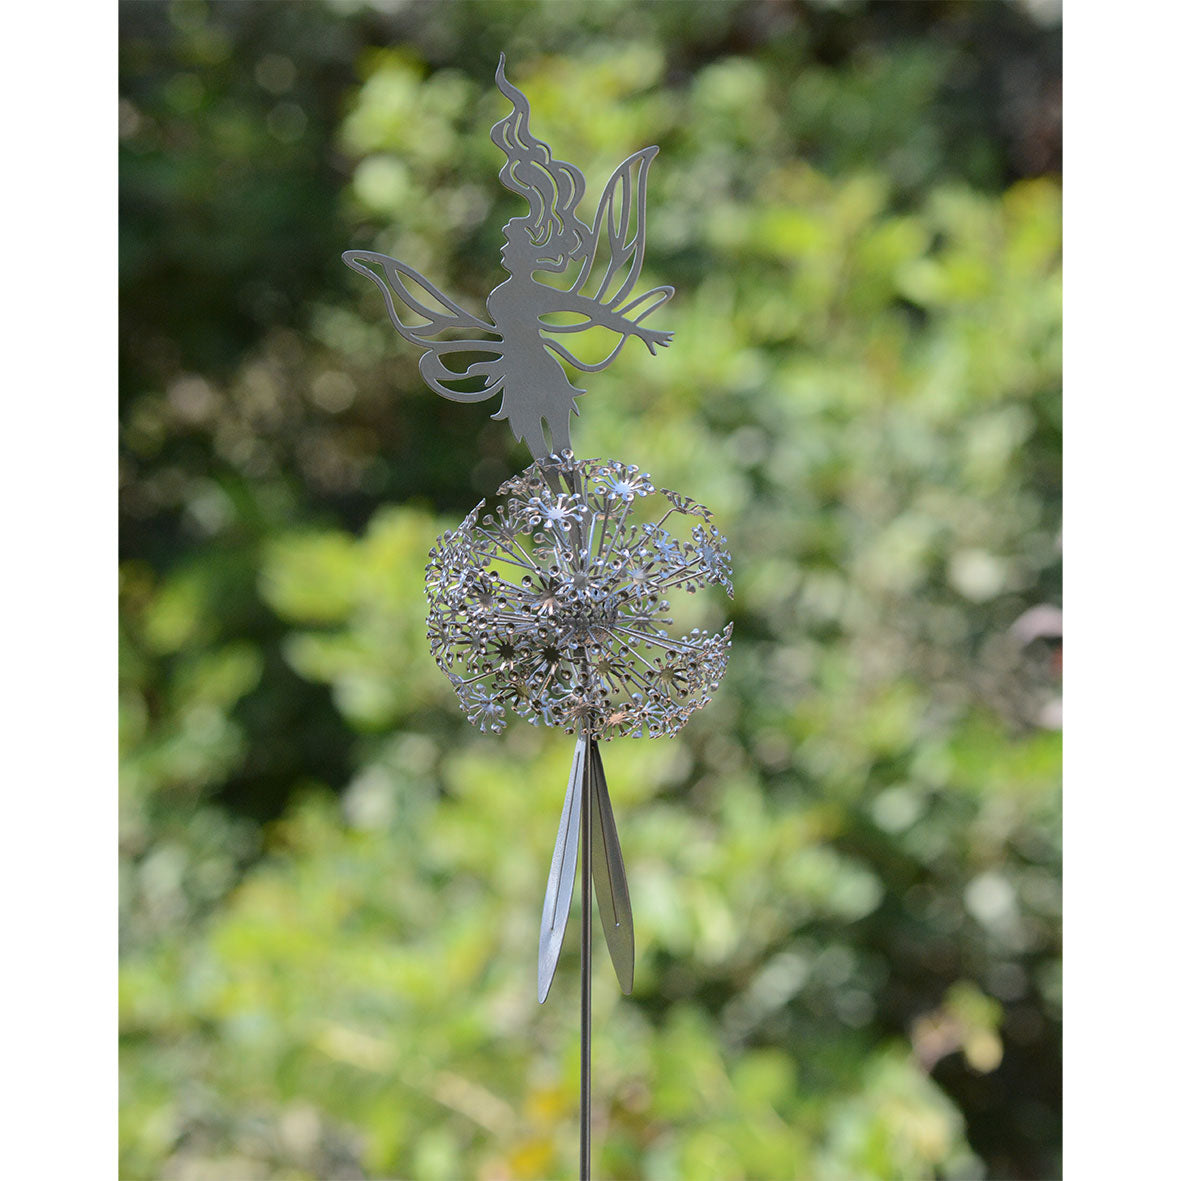 The Magical Tinker – The Dancing Fairy Steel Statue